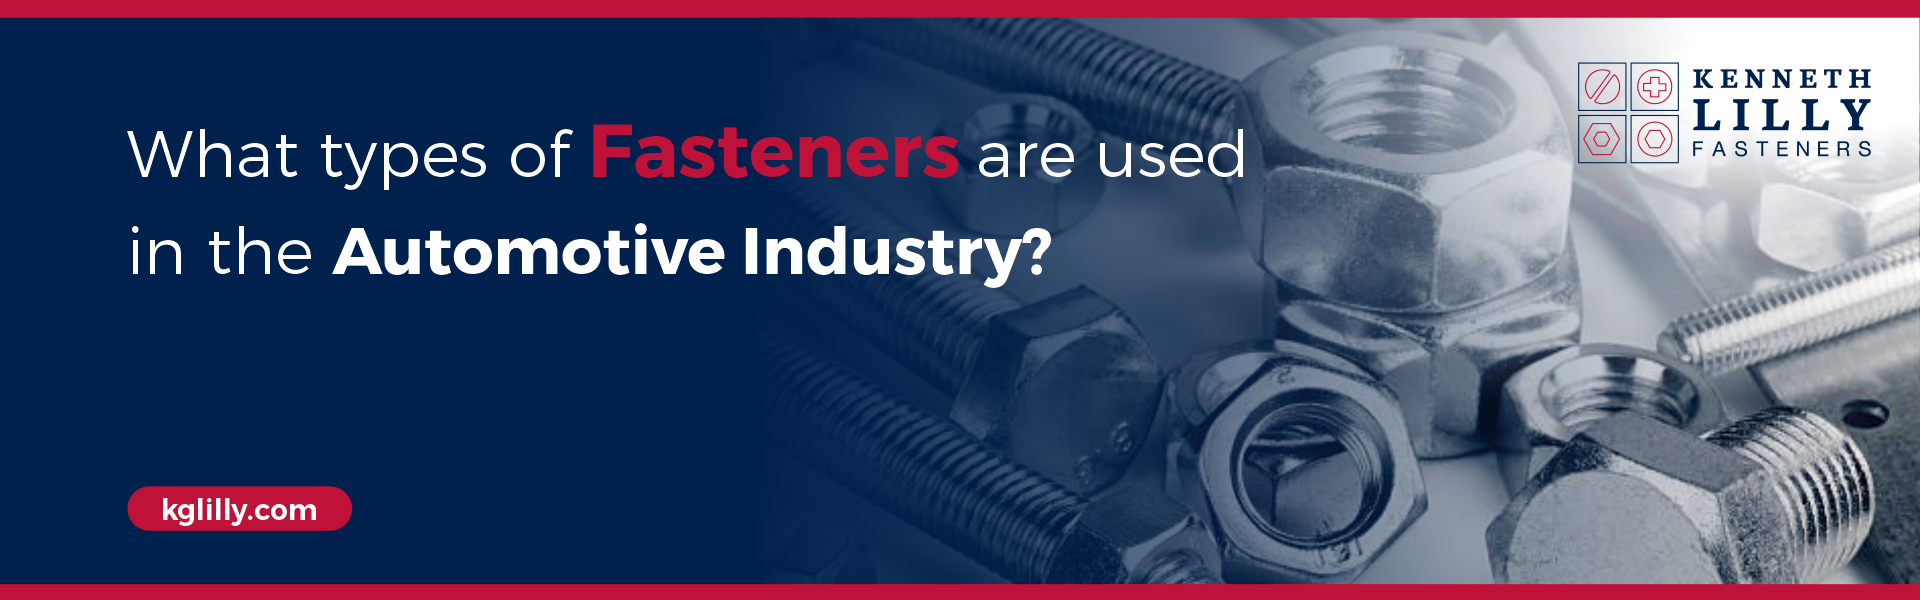 Types Of Fasteners Used In The Automotive Industry Kg Lilly Fasteners 